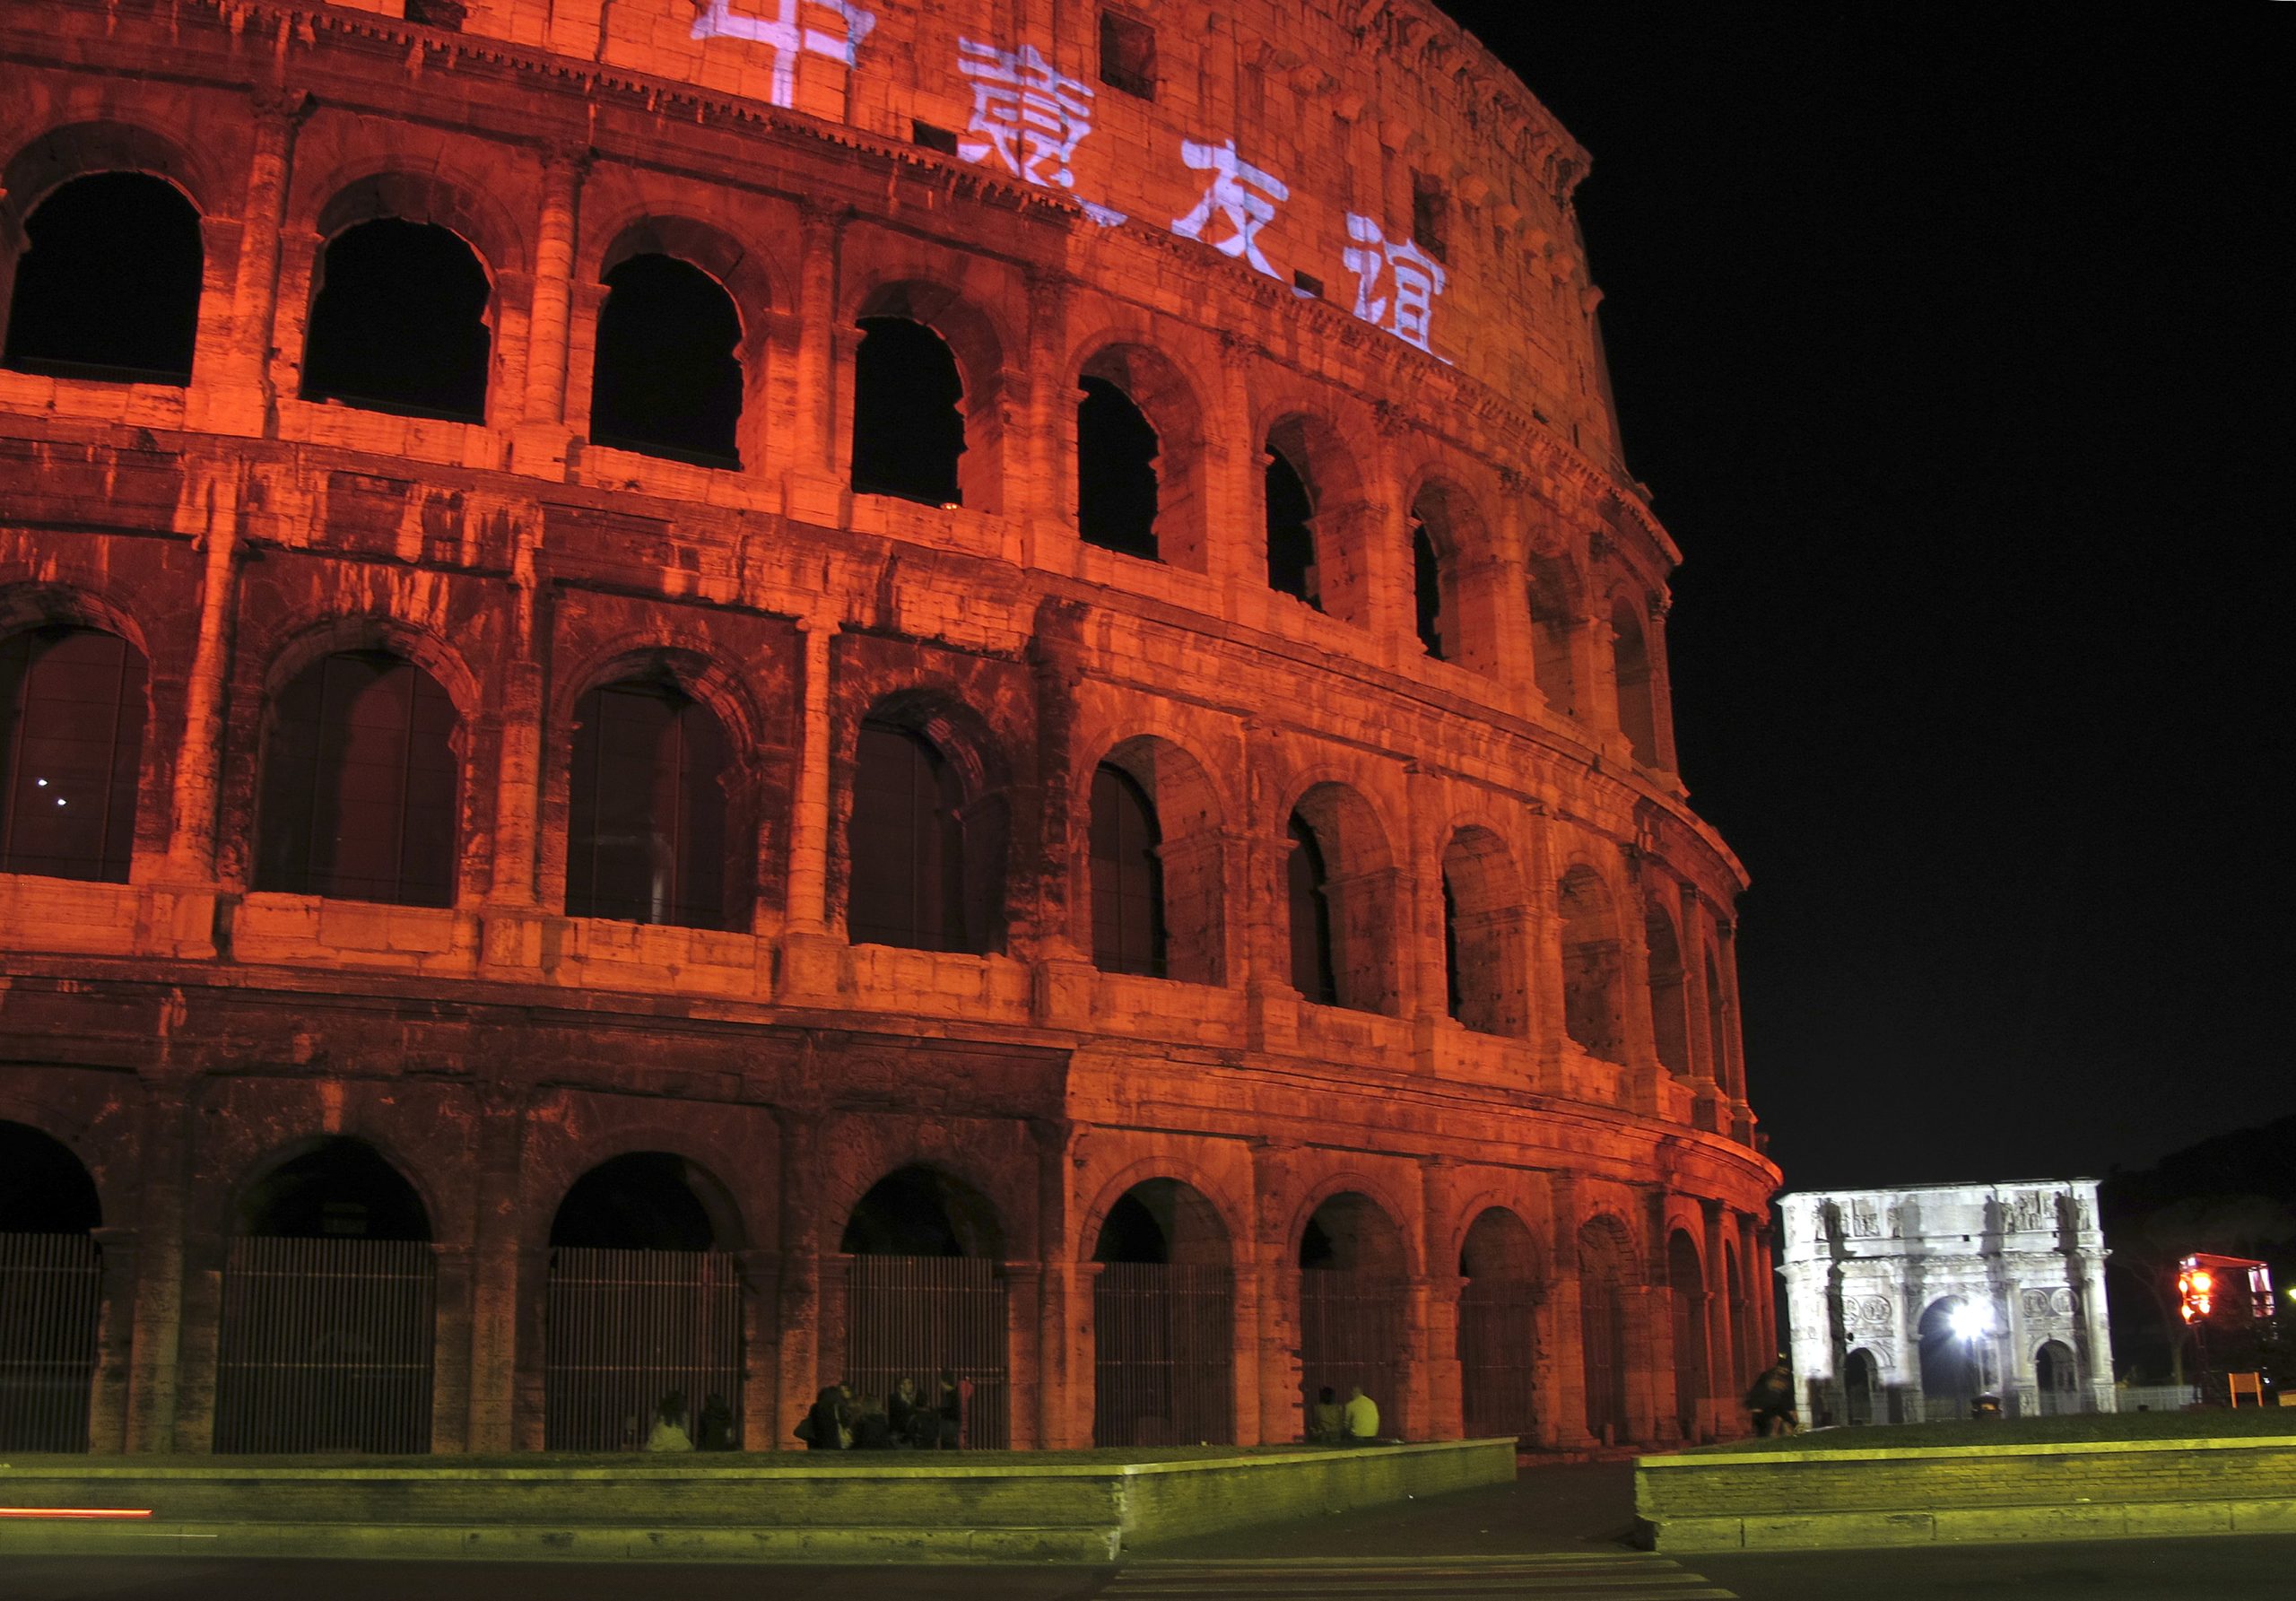 Photo: The facade of the Colosseum is bathed in red light and decorated with Chinese words during an economic summit in Rome October 8, 2010. Italy and China aim to more than double the annual value of their trade to as much as $100 billion by 2015, Chinese Premier Wen Jiabao said on Thursday after a meeting with Italian Prime Minister Silvio Berlusconi. The words on the Colosseum read, "Sino-Italian friendship". Credit: REUTERS/Alessandro Bianch